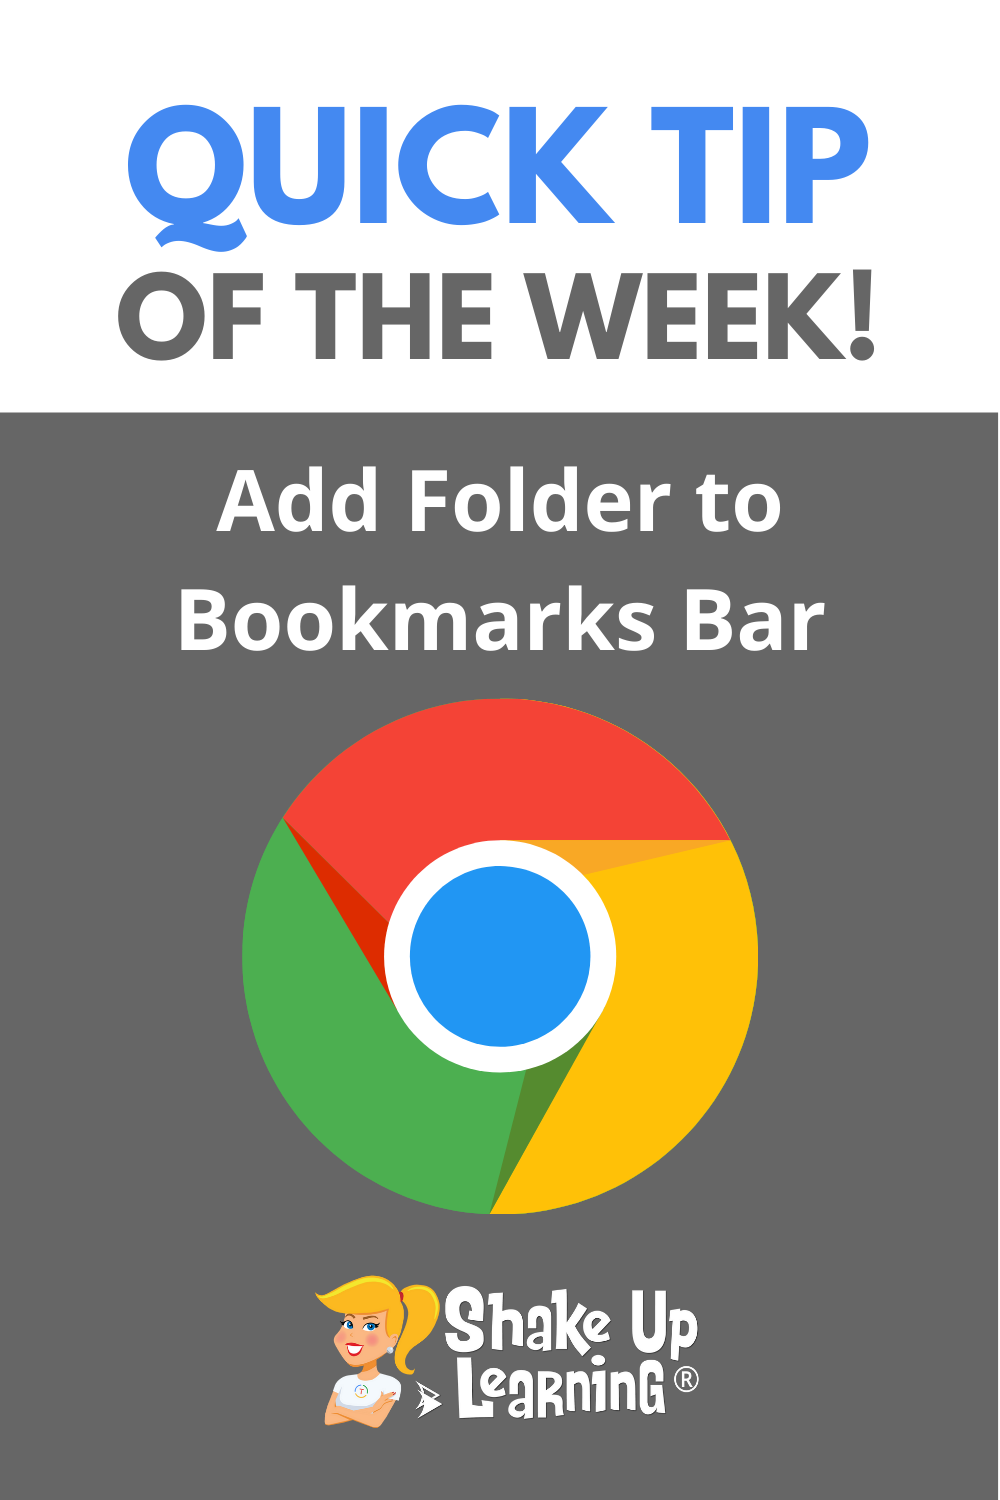 How to Add a Folder to the Chrome Bookmarks Bar